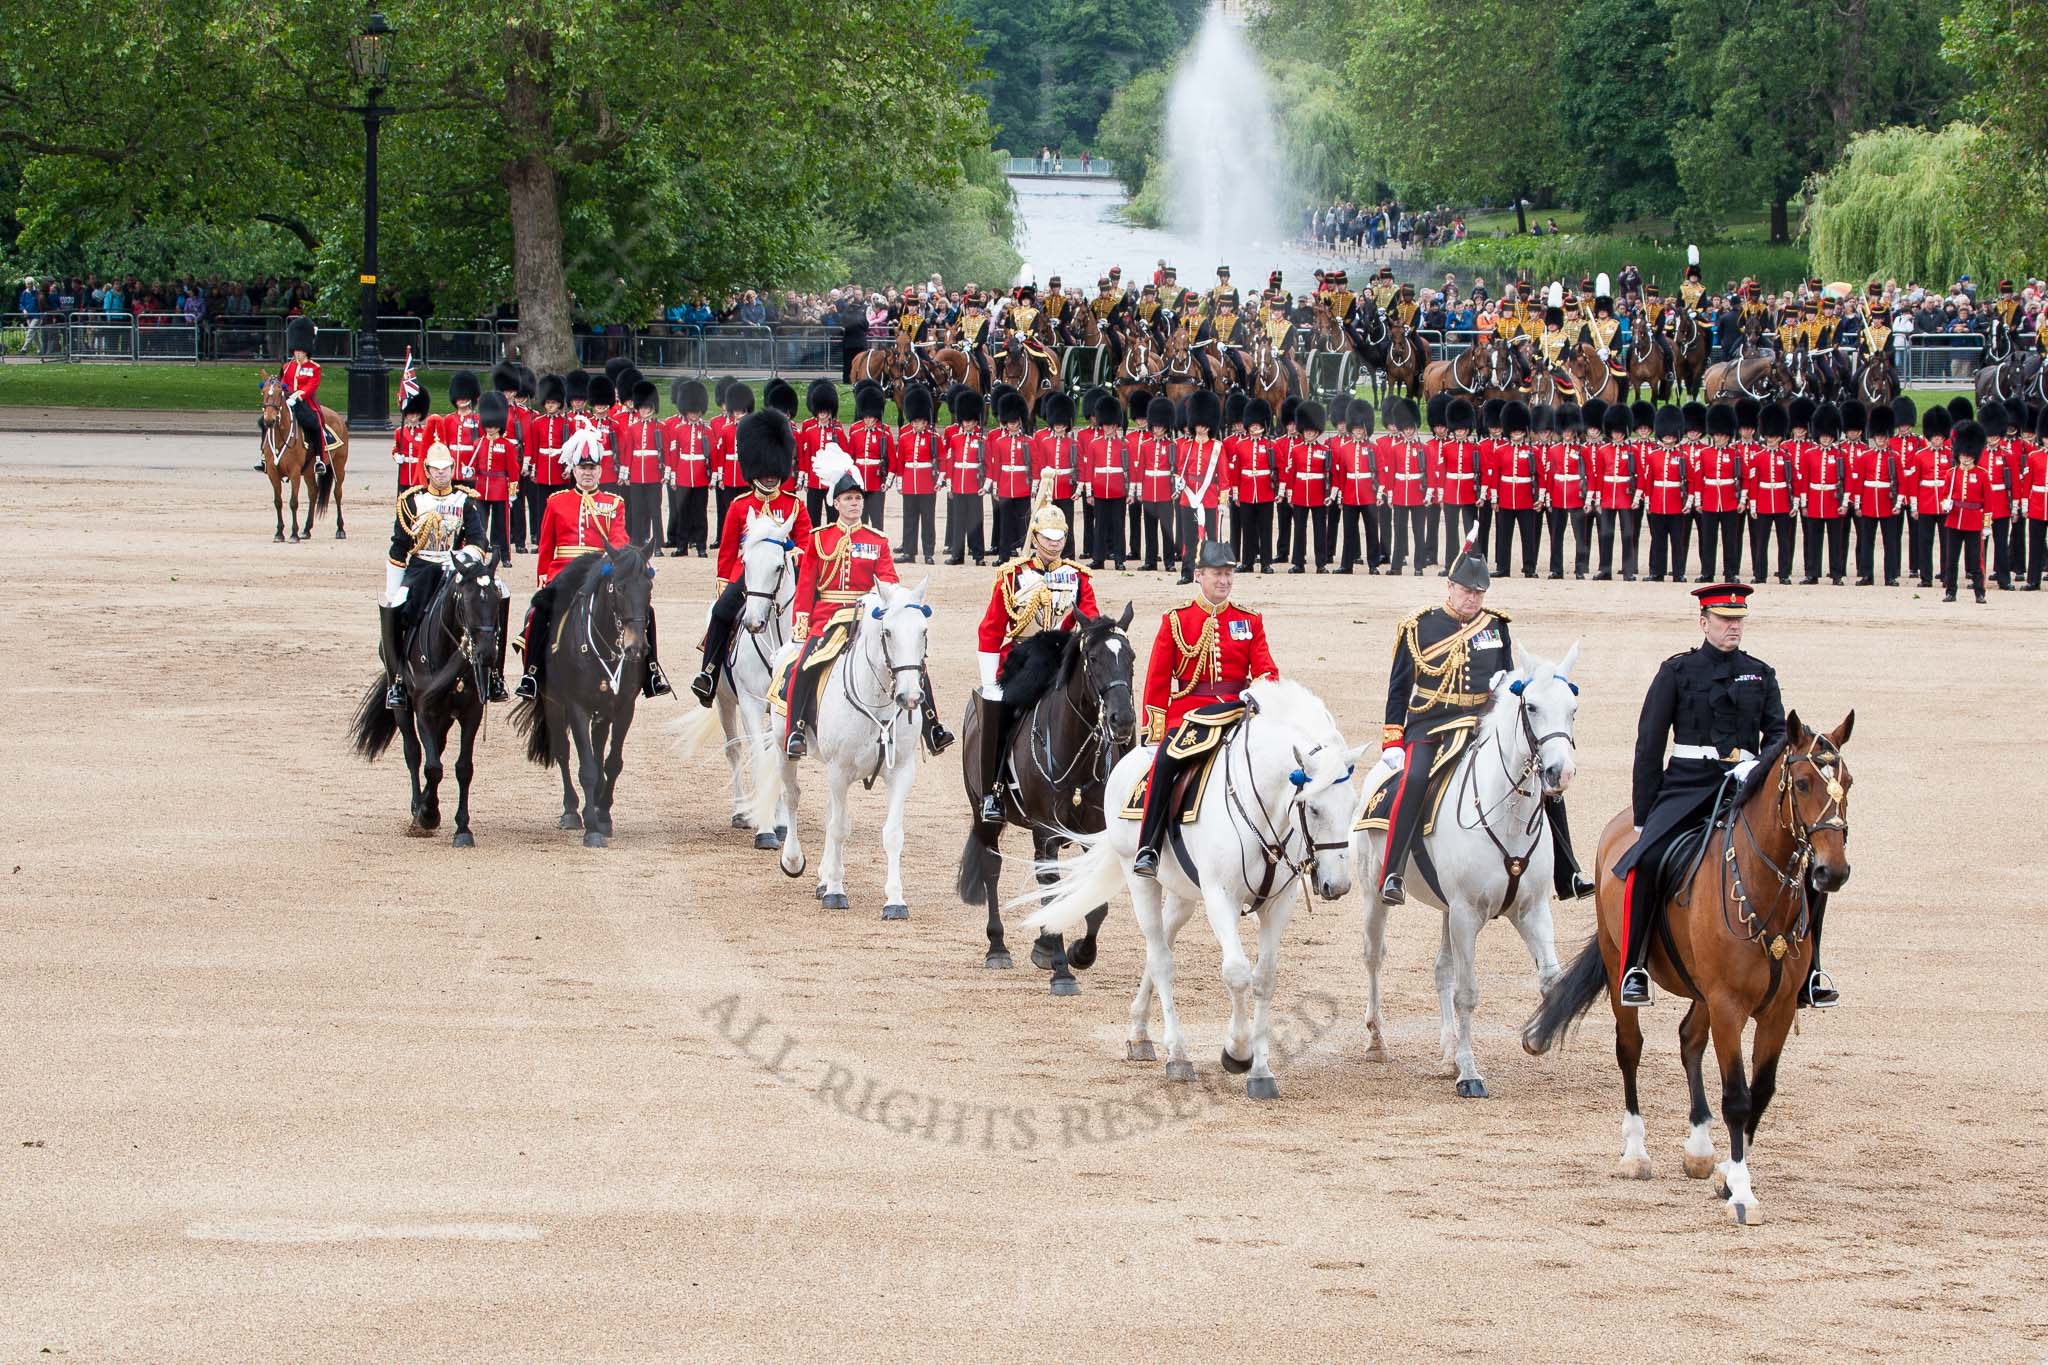 The Colonel's Review 2012: The "Royal Procession" returning from the Inspection of the Line..
Horse Guards Parade, Westminster,
London SW1,

United Kingdom,
on 09 June 2012 at 11:05, image #201